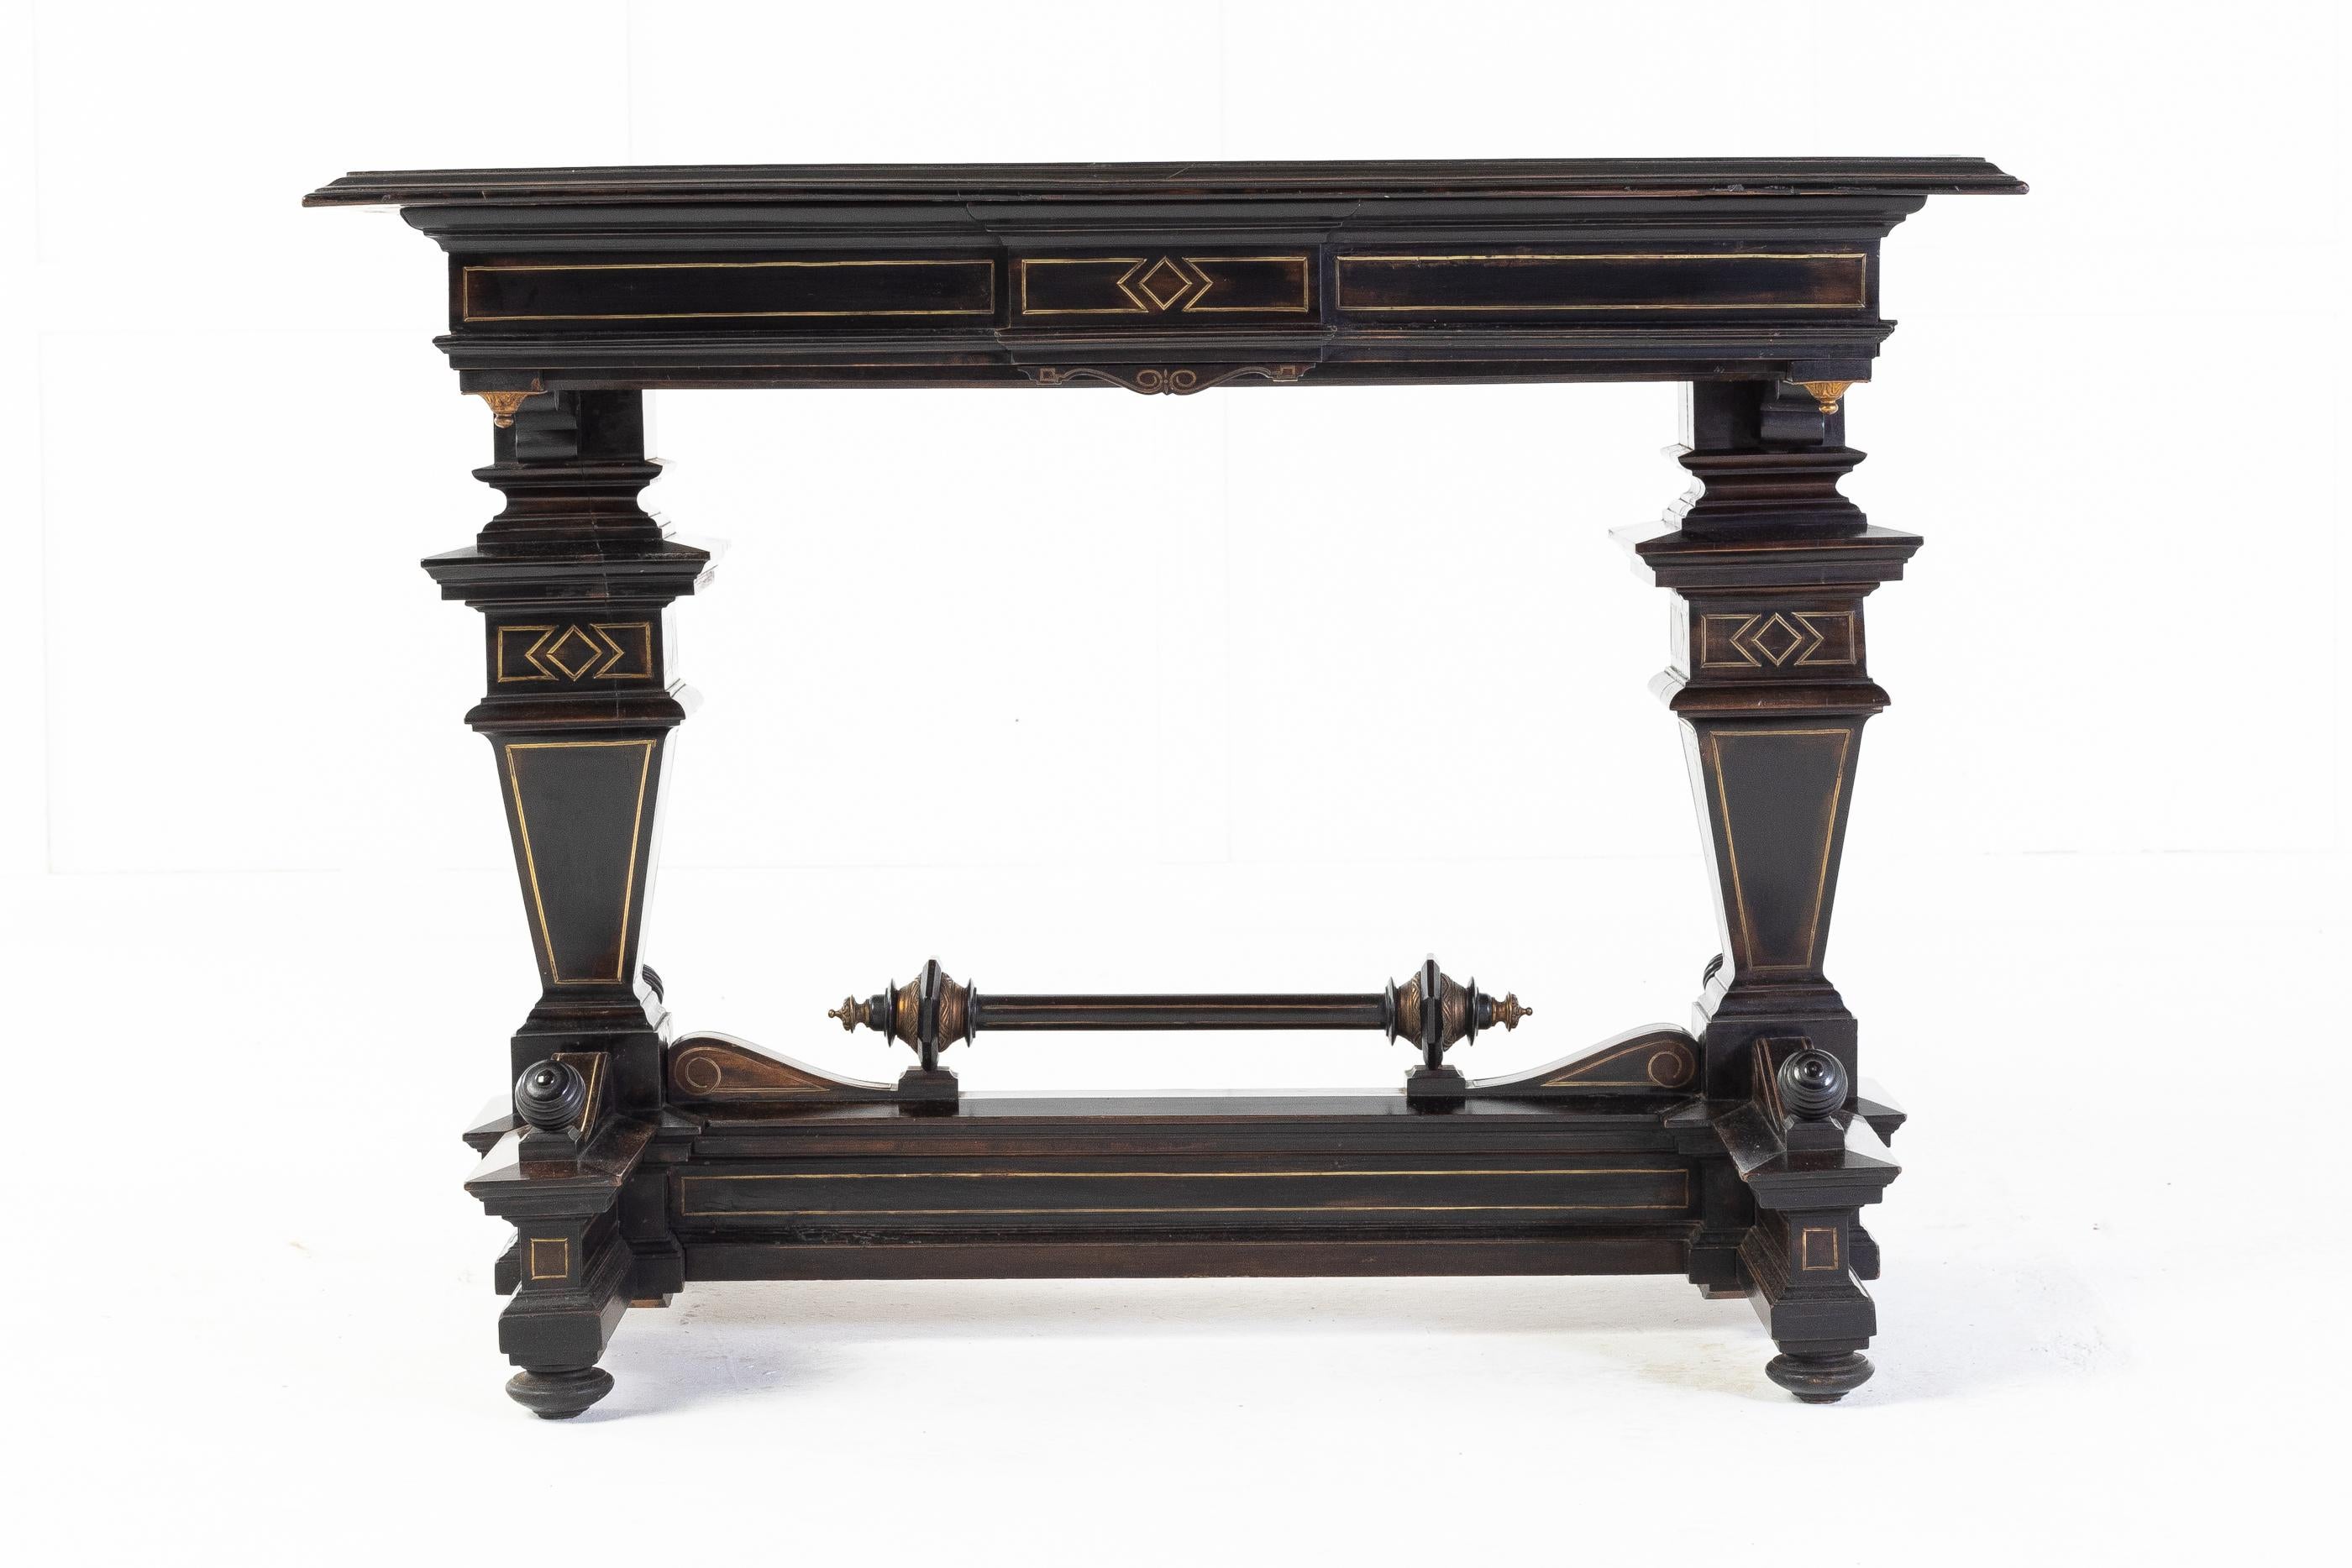 Very unusual 19th century French ebonised side table. This unusual design has many mouldings each inlaid with brass to highlight the mouldings. The top, also with brass inlay sits above a frieze with a single long drawer. Two unusual supports are